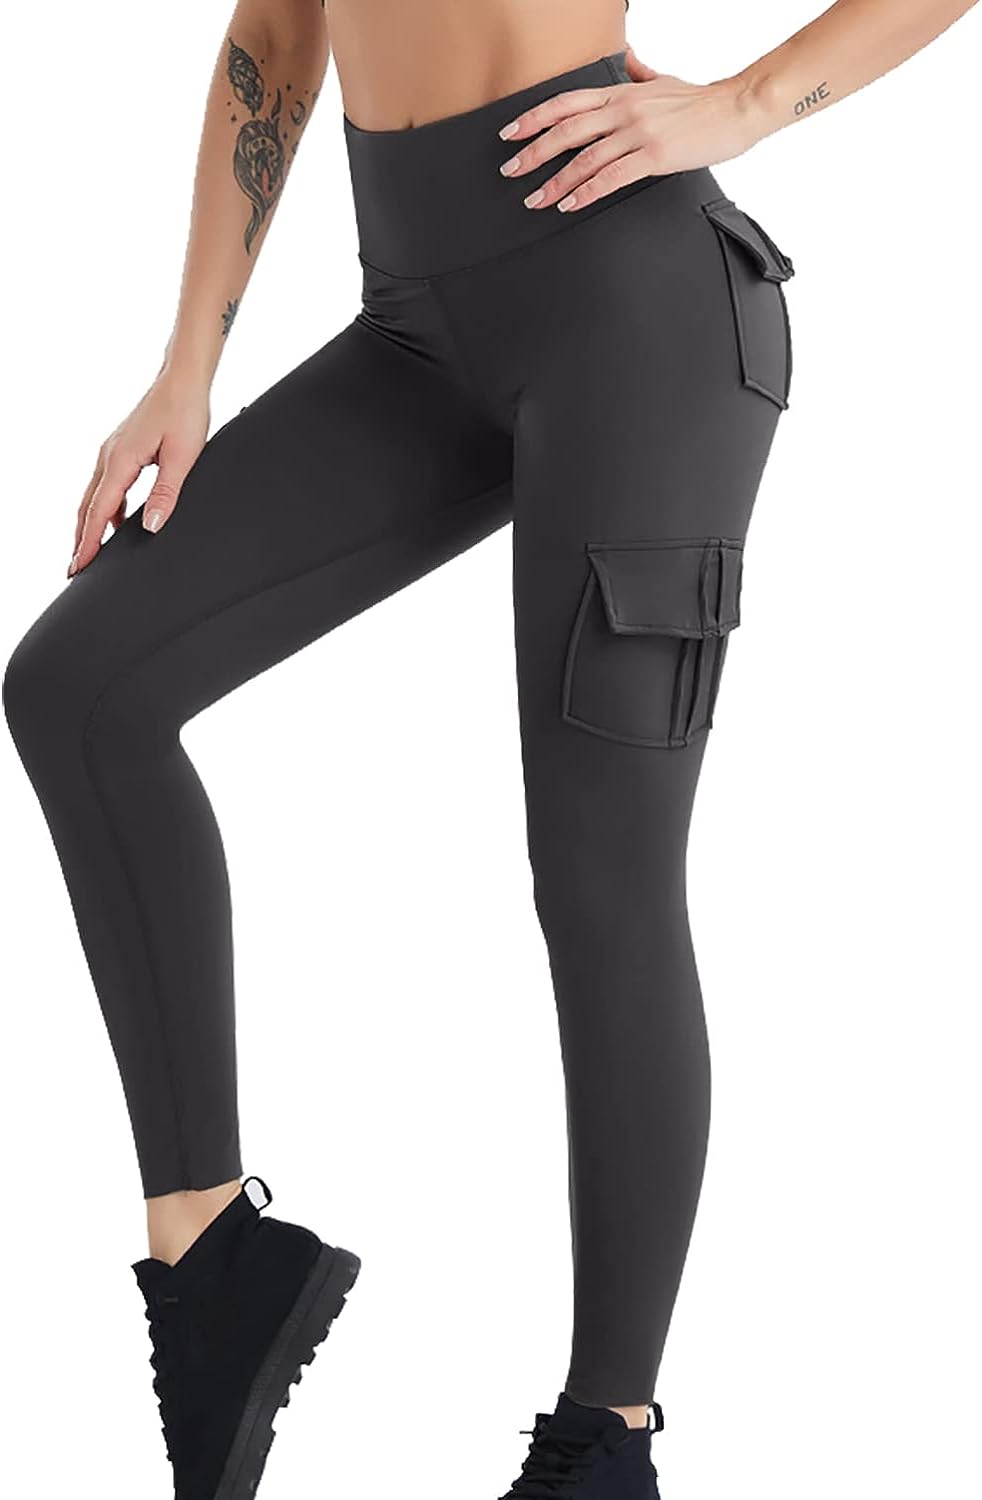 COMFY ONE Seamless Leggings with 4 Pockets for Women Compression